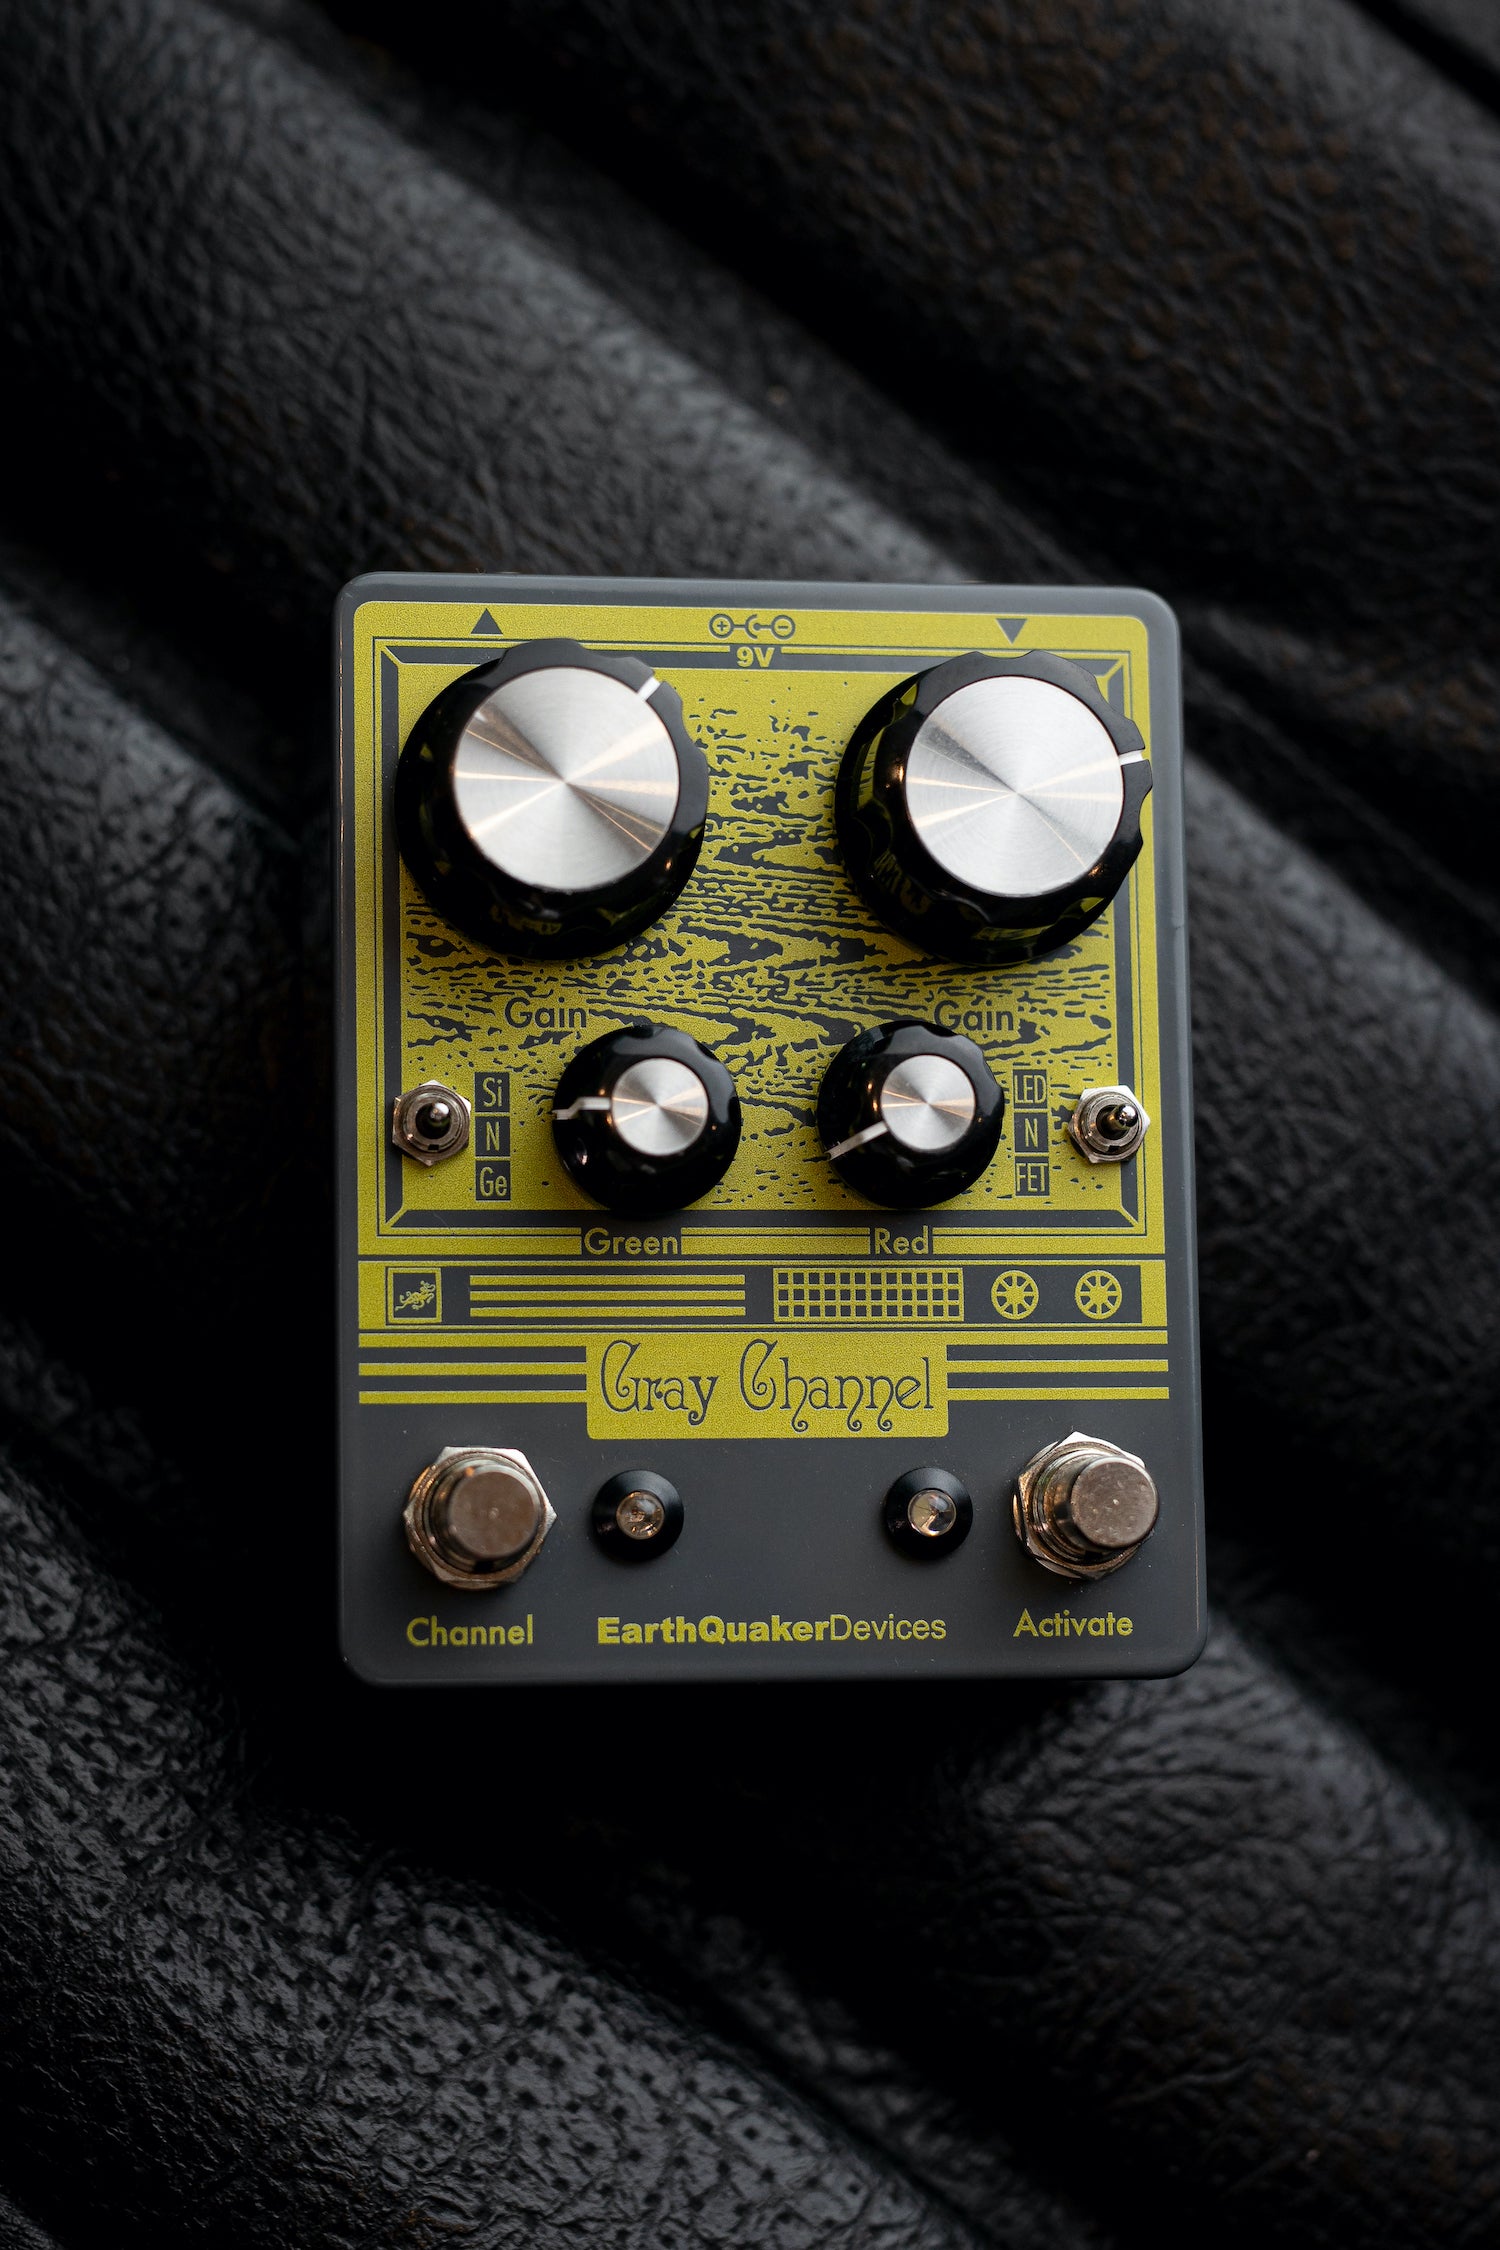 EarthQuakerDevices gray channel グレイチャンネル